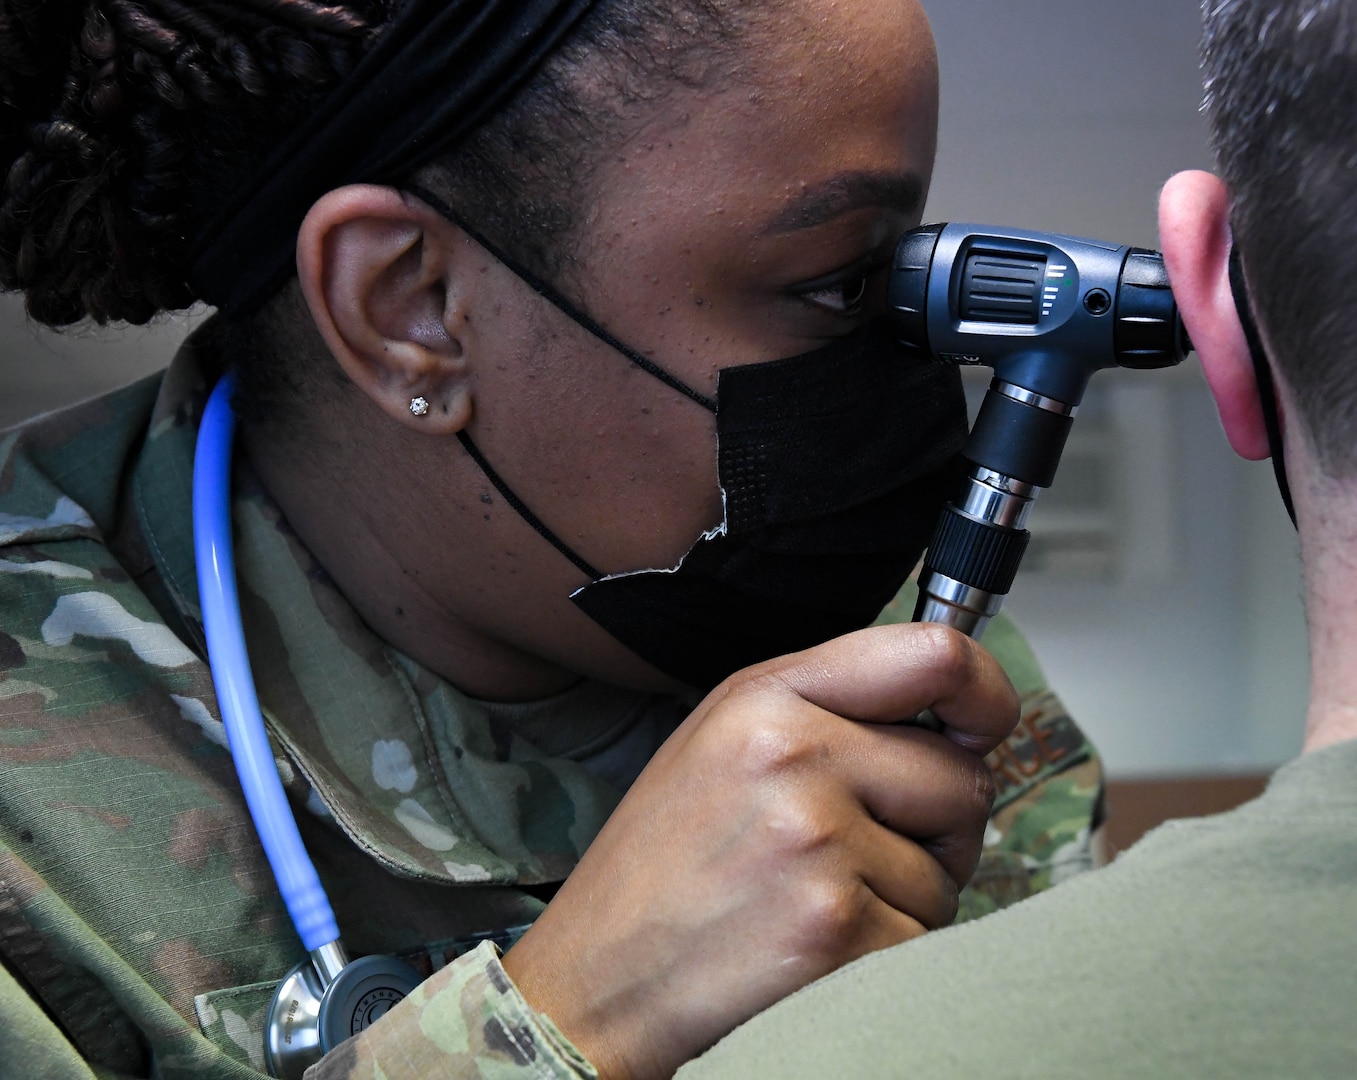 U.S. Air Force Tech. Sgt. Latasha Smith, 86th Operational Medical Readiness Squadron warrior medicine clinic flight chief, performs an ear exam on a patient at Ramstein Air Base, Germany, Feb. 3, 2022. The ear exam is part of a health and wellness check that ensures that an Airman is ready for a deployment.  (U.S. Air Force photo by Airman 1st Class Jared Lovett)